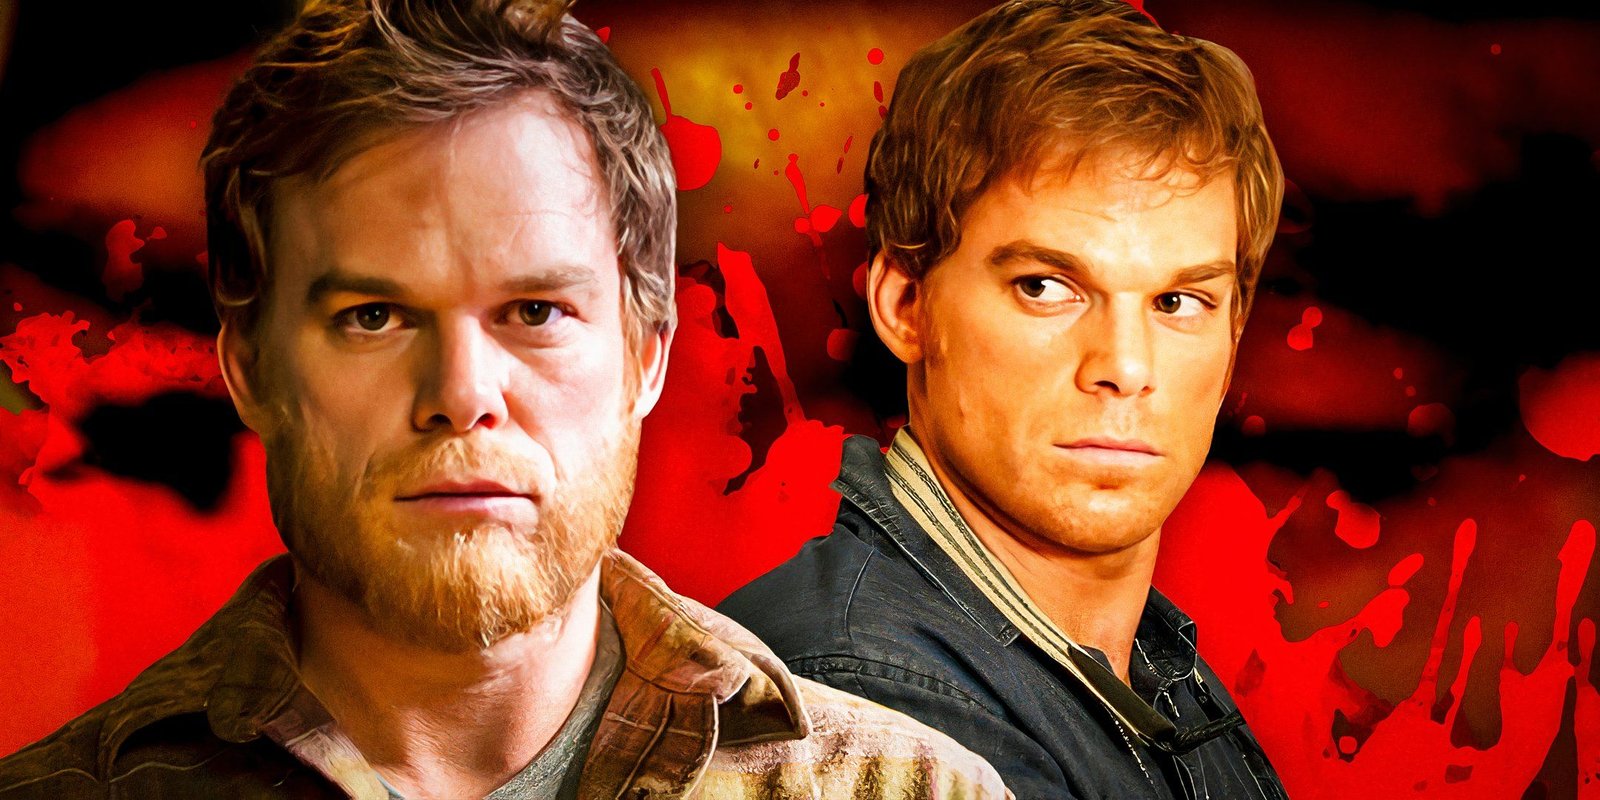 Dexter Subtly Foreshadowed The Original Show's Controversial Ending In His Third On-Screen Kill